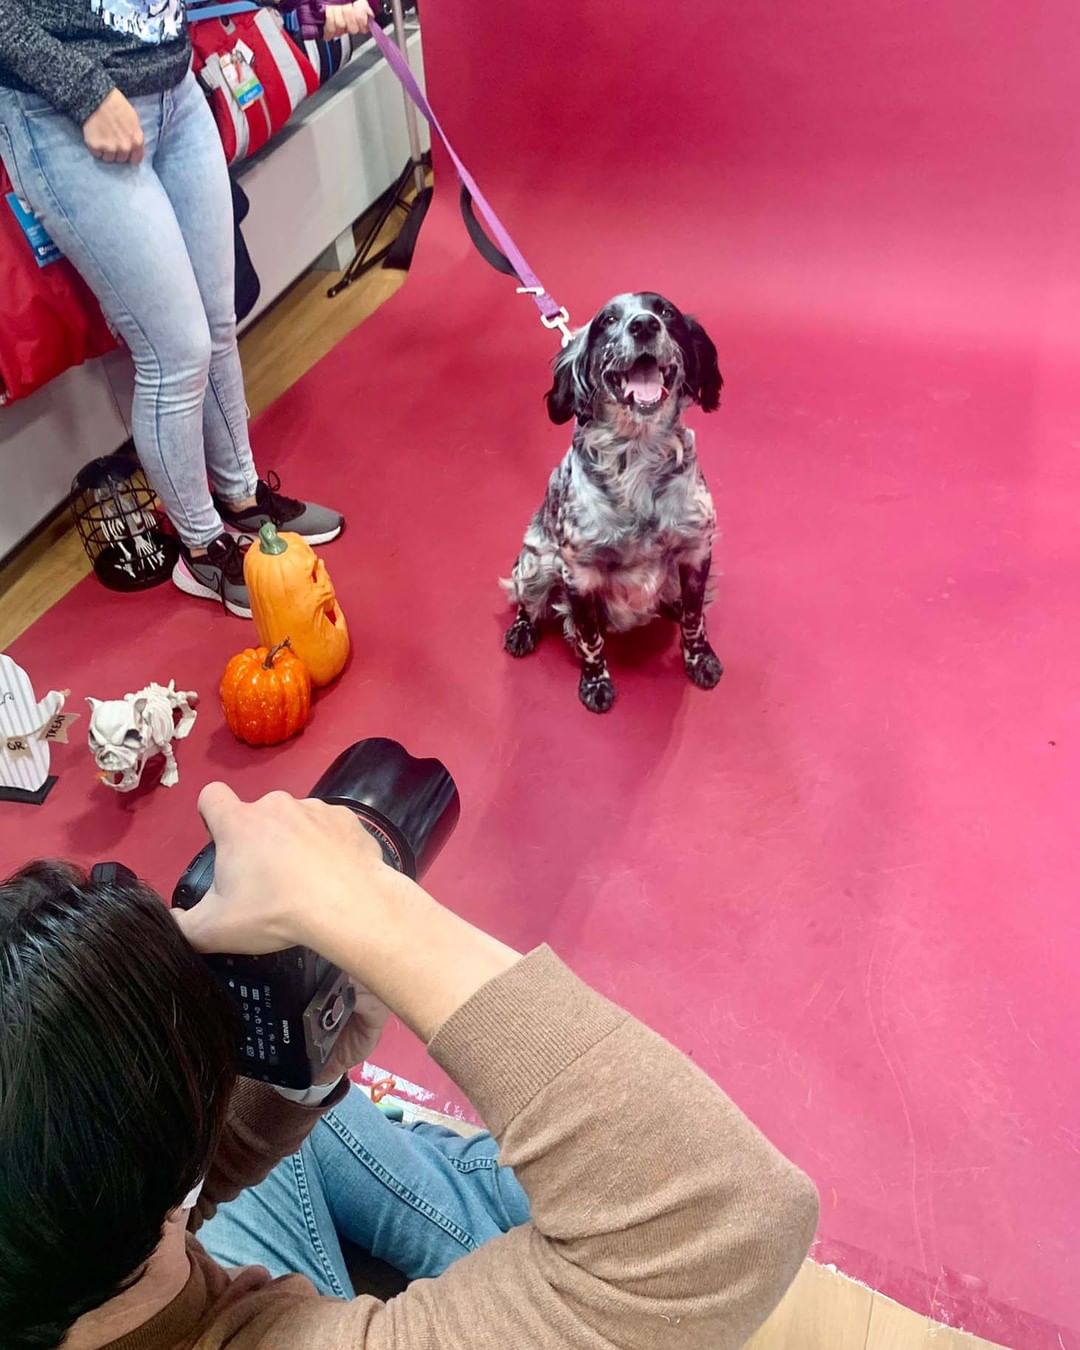 Wishing everyday was a doggy photoshoot day! 🥺

Check out some of the behind-the-scenes snaps from Saturday’s HOWL O’WEEN photoshoot fundraiser! A big thank you to everyone who came out to make this day a big success, to @renspets Liberty Village for hosting and to @capturenorthstudios for volunteering to be our awesome photographer.
.
.
.
.
.
.
<a target='_blank' href='https://www.instagram.com/explore/tags/DogHalloween/'>#DogHalloween</a> <a target='_blank' href='https://www.instagram.com/explore/tags/HalloweenDogCostumes/'>#HalloweenDogCostumes</a> <a target='_blank' href='https://www.instagram.com/explore/tags/HalloweenForDogs/'>#HalloweenForDogs</a> <a target='_blank' href='https://www.instagram.com/explore/tags/DogRescue/'>#DogRescue</a> <a target='_blank' href='https://www.instagram.com/explore/tags/Fundraiser/'>#Fundraiser</a> <a target='_blank' href='https://www.instagram.com/explore/tags/TorontoEvents/'>#TorontoEvents</a> <a target='_blank' href='https://www.instagram.com/explore/tags/TorontoDogMoms/'>#TorontoDogMoms</a> <a target='_blank' href='https://www.instagram.com/explore/tags/TorontoDogDads/'>#TorontoDogDads</a> <a target='_blank' href='https://www.instagram.com/explore/tags/TorontoDogs/'>#TorontoDogs</a> <a target='_blank' href='https://www.instagram.com/explore/tags/DogsInThe6ix/'>#DogsInThe6ix</a> <a target='_blank' href='https://www.instagram.com/explore/tags/StrayToPlay/'>#StrayToPlay</a> <a target='_blank' href='https://www.instagram.com/explore/tags/DogCostumes/'>#DogCostumes</a> <a target='_blank' href='https://www.instagram.com/explore/tags/DogPhotoshoot/'>#DogPhotoshoot</a>